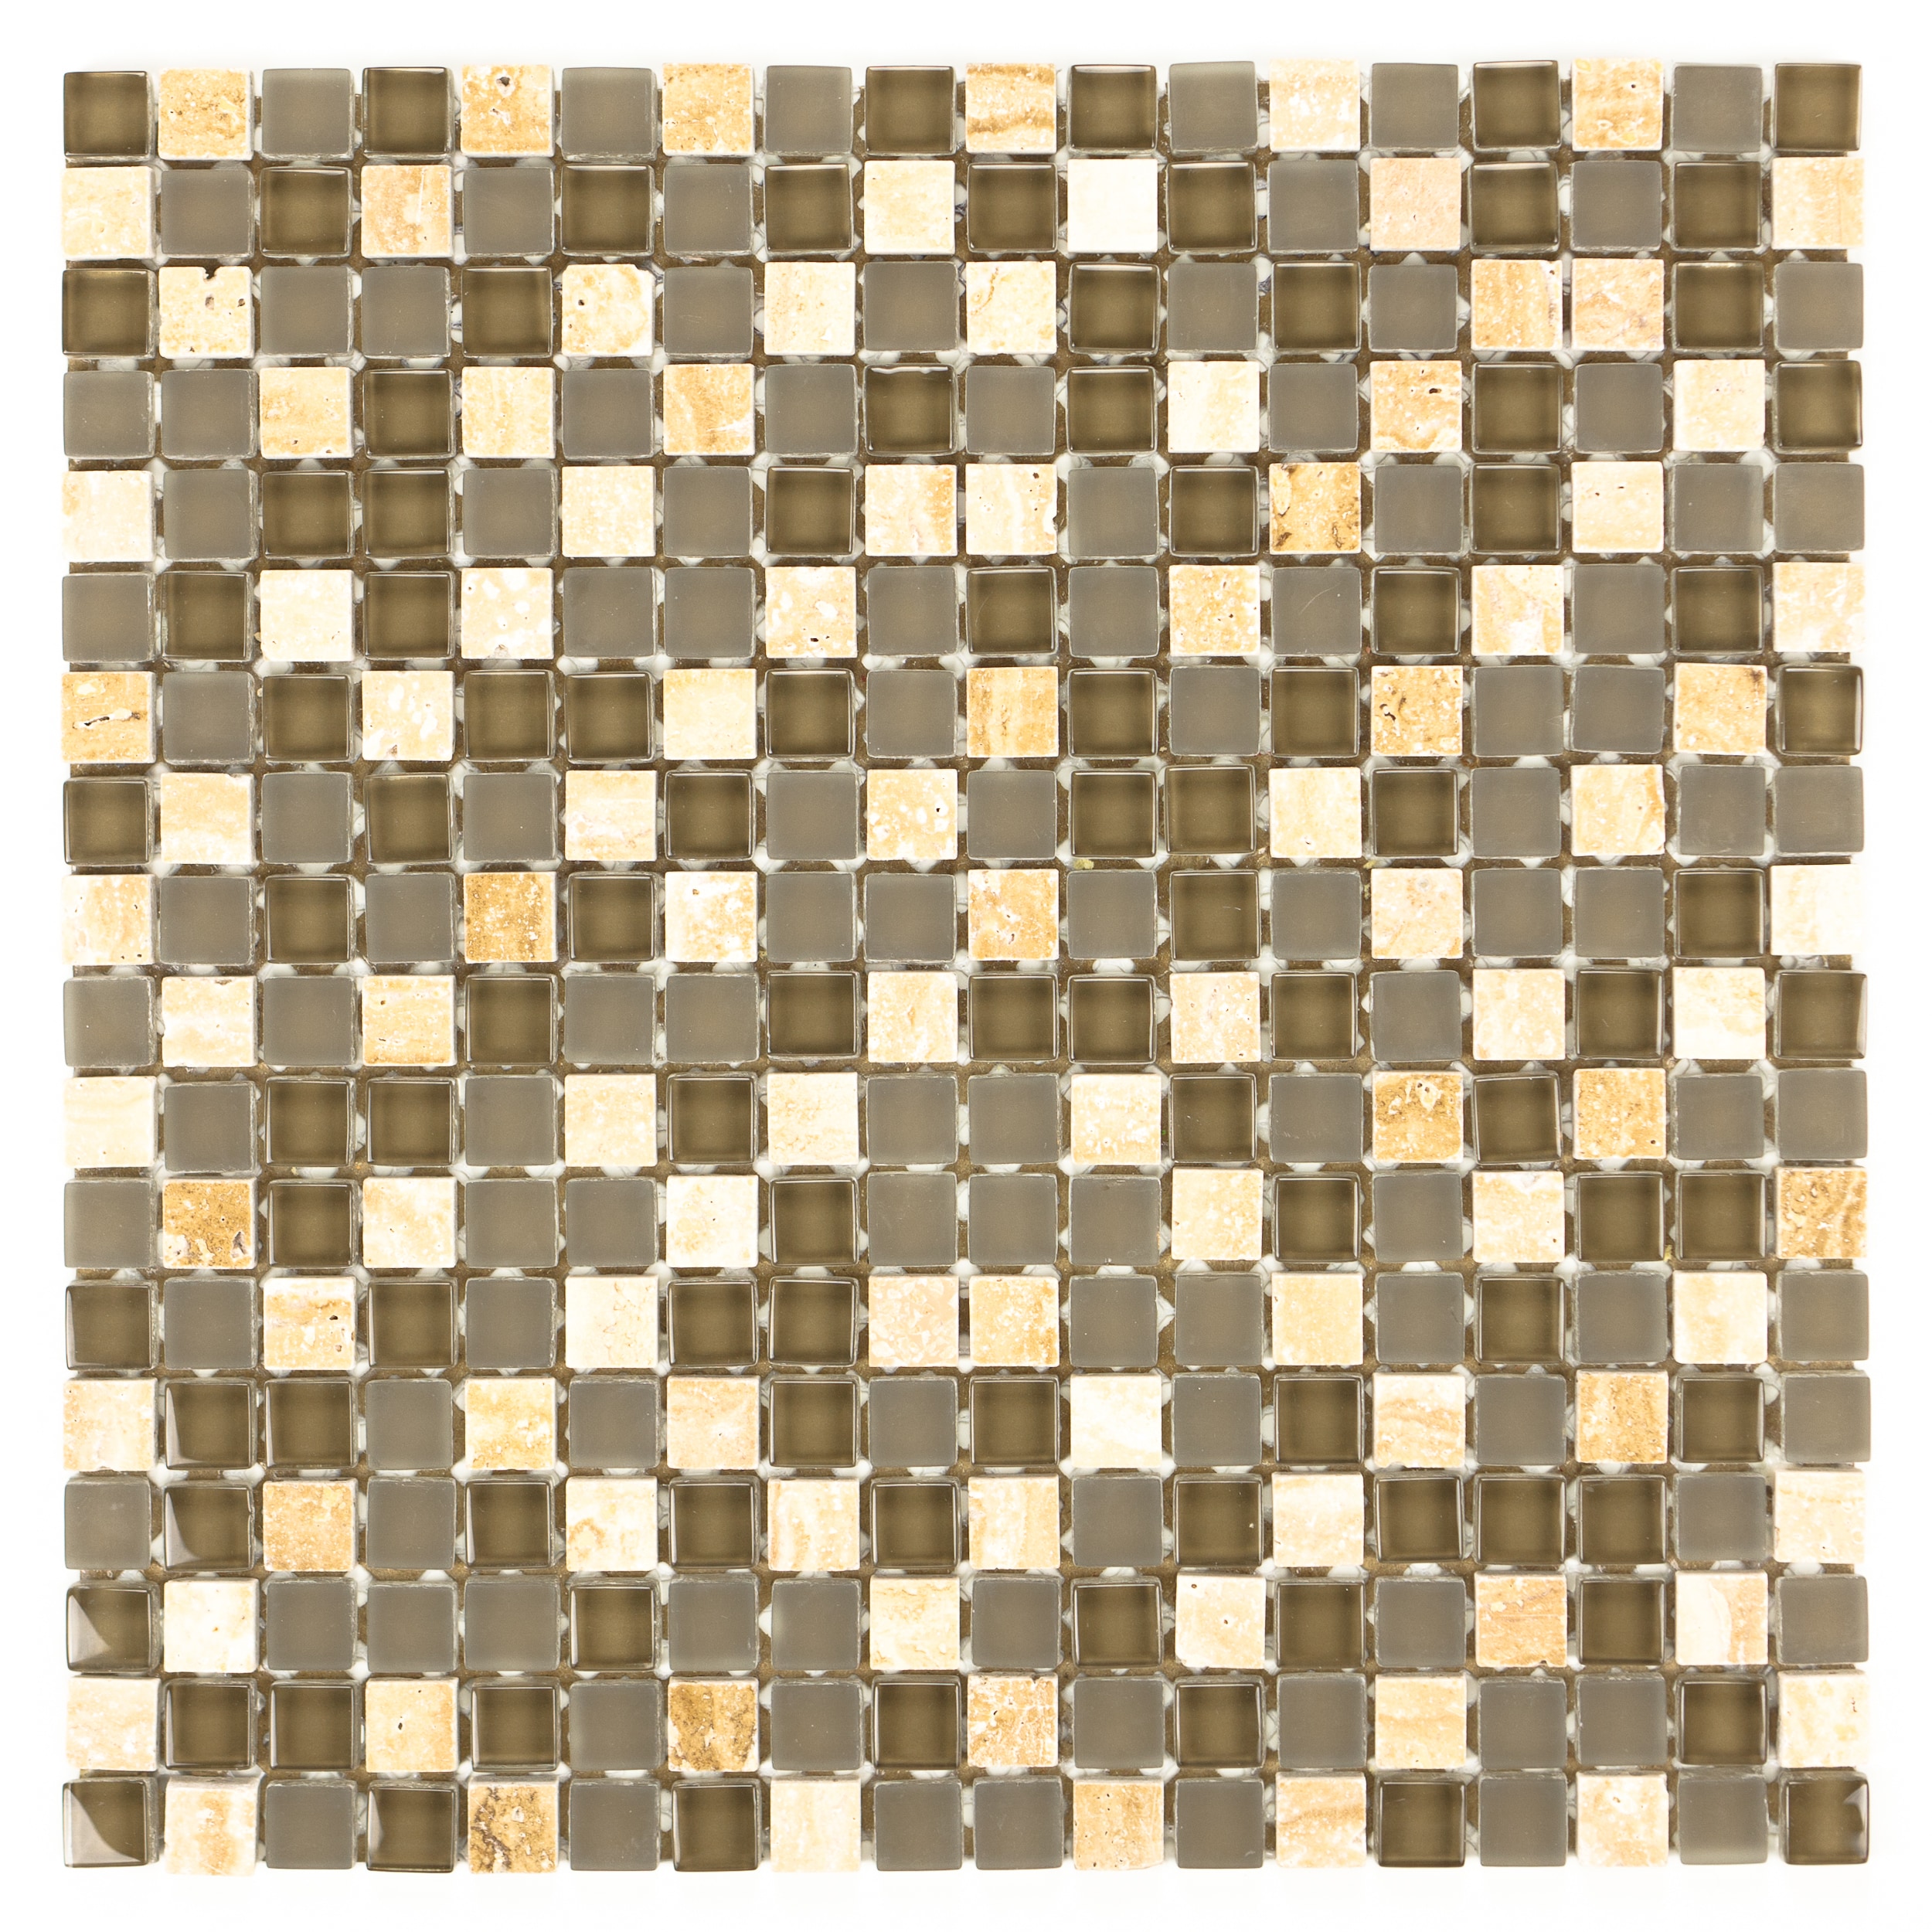 ICL Tile   Wall and Floor Tiles in Ceramic, Mosaic 